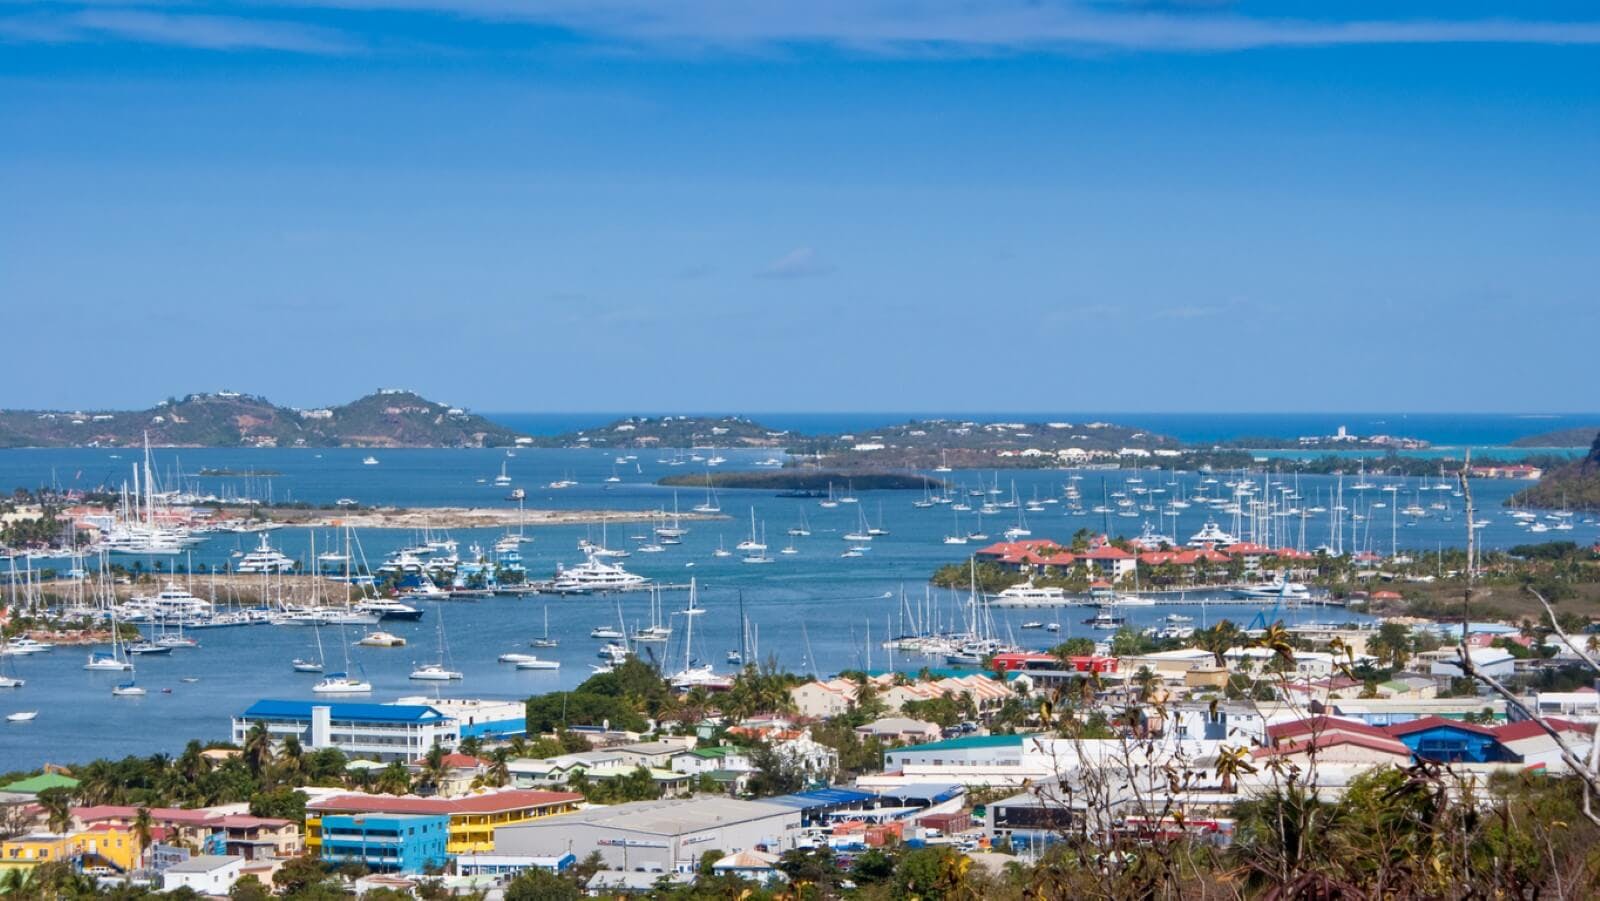 Simpson Bay harbor in Saint Martin, with fishing and leisure boats and yachts in clear blue sea, green hills in the background and small colorful buildings lining the shore